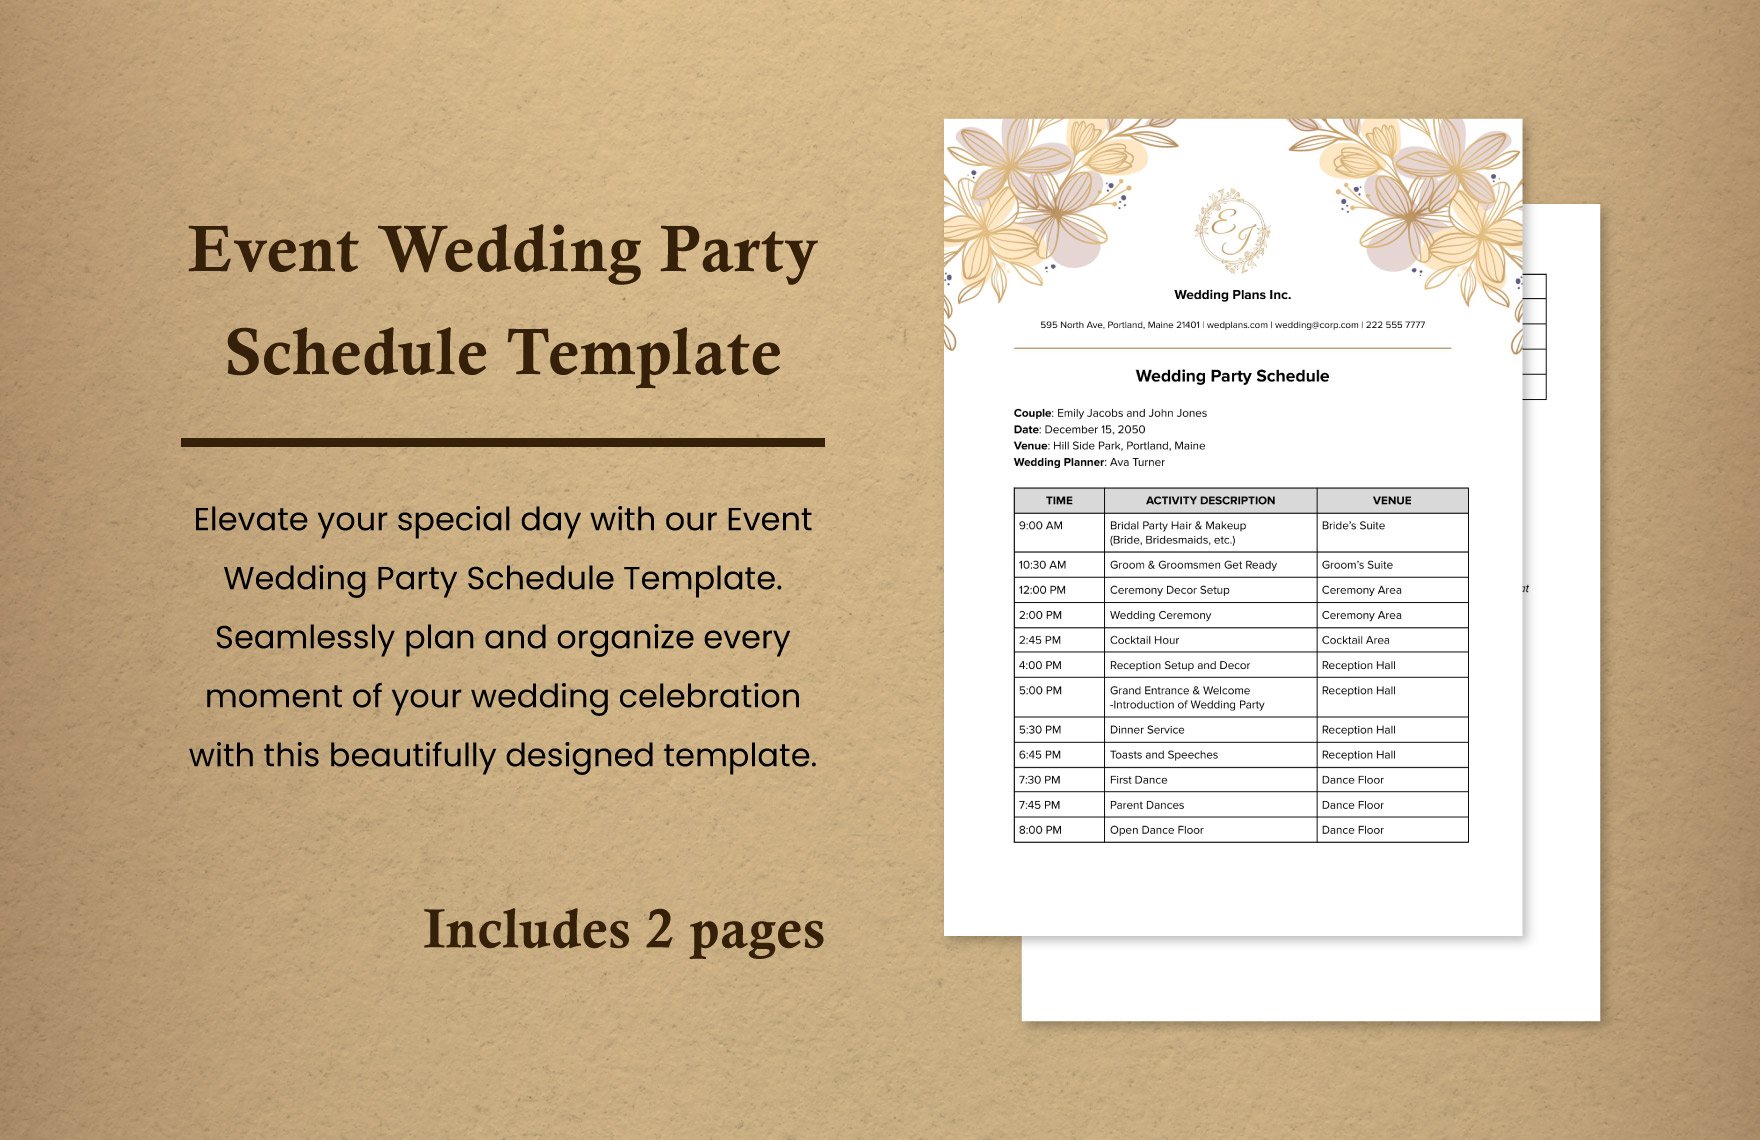 Event Wedding Party Schedule Template